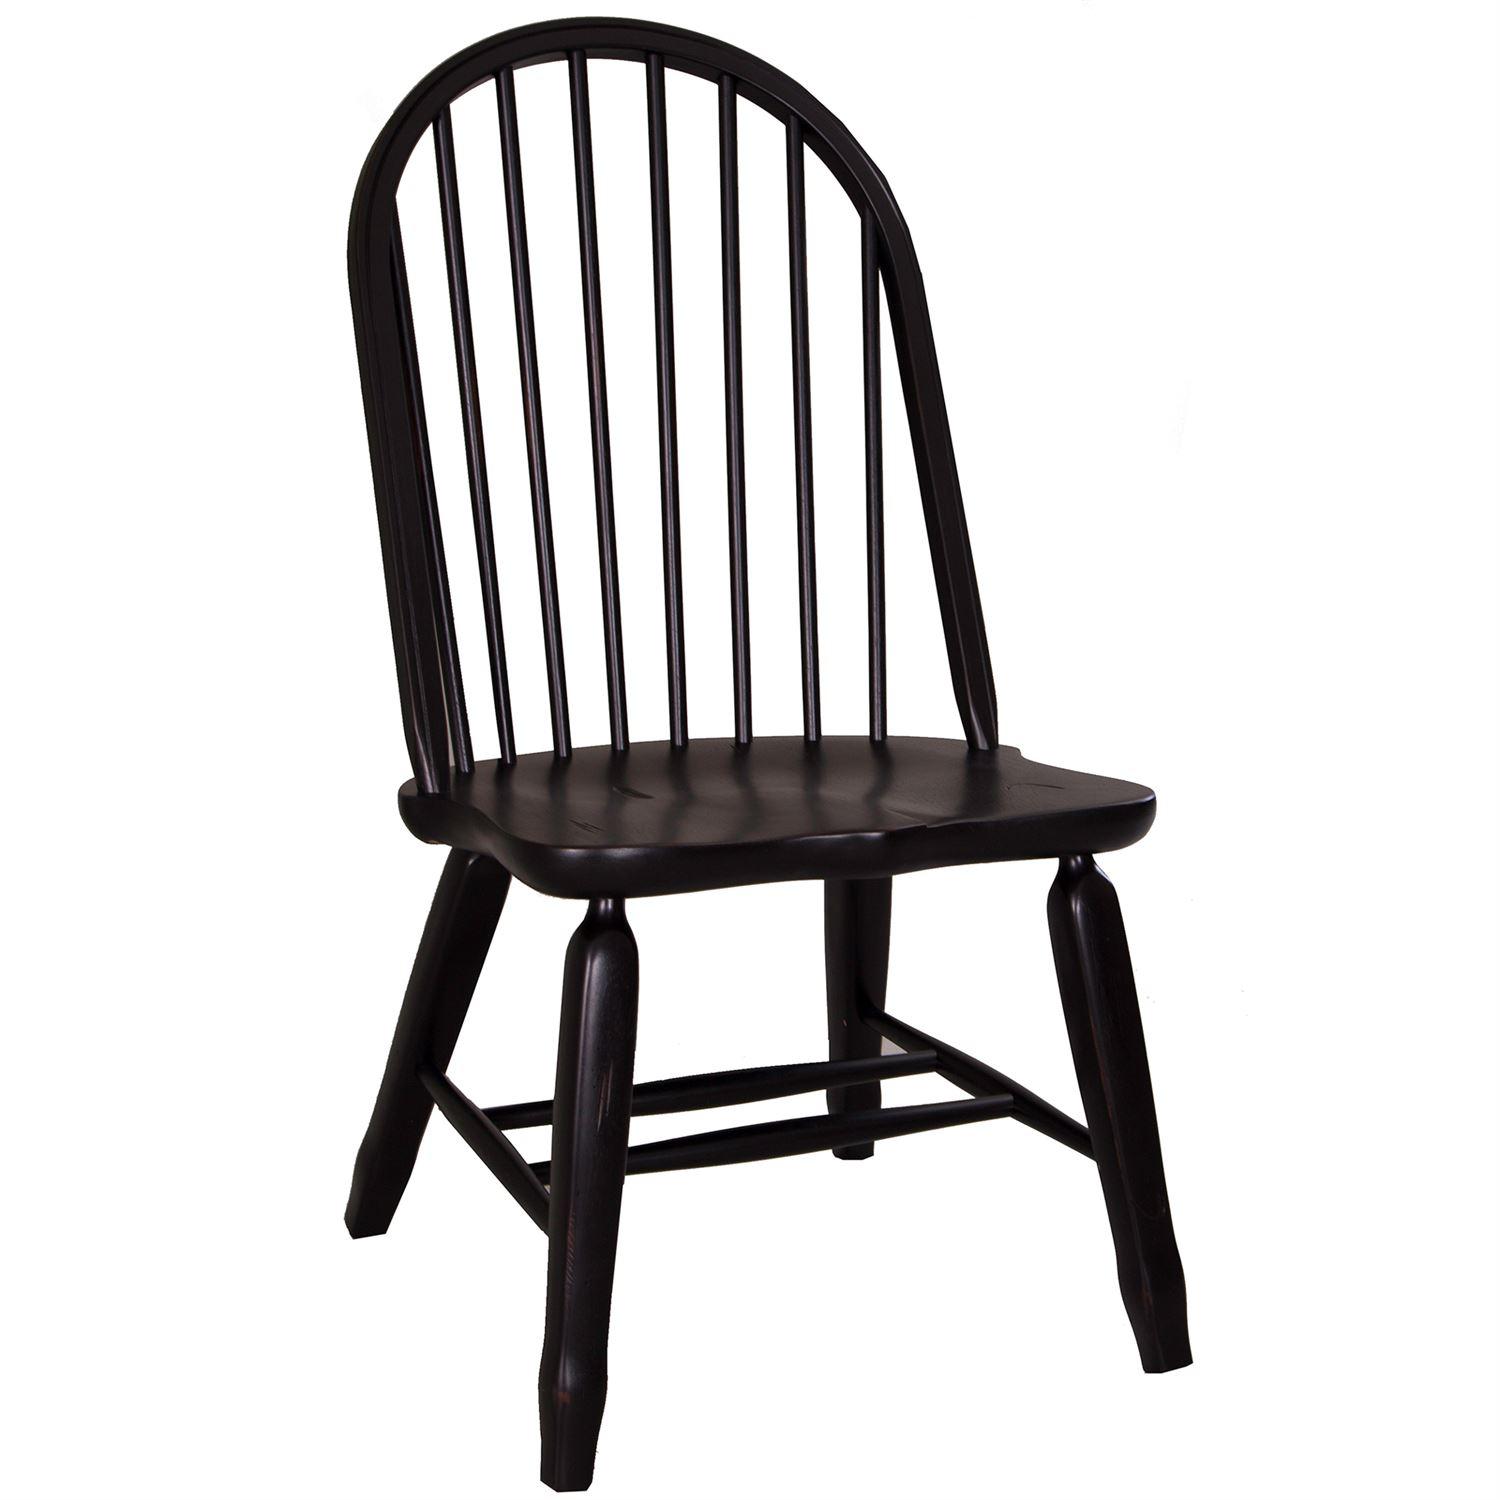 Transitional Dining Side Chair Treasures  (17-DR) Dining Side Chair 17-C4050 in Black Lacquer